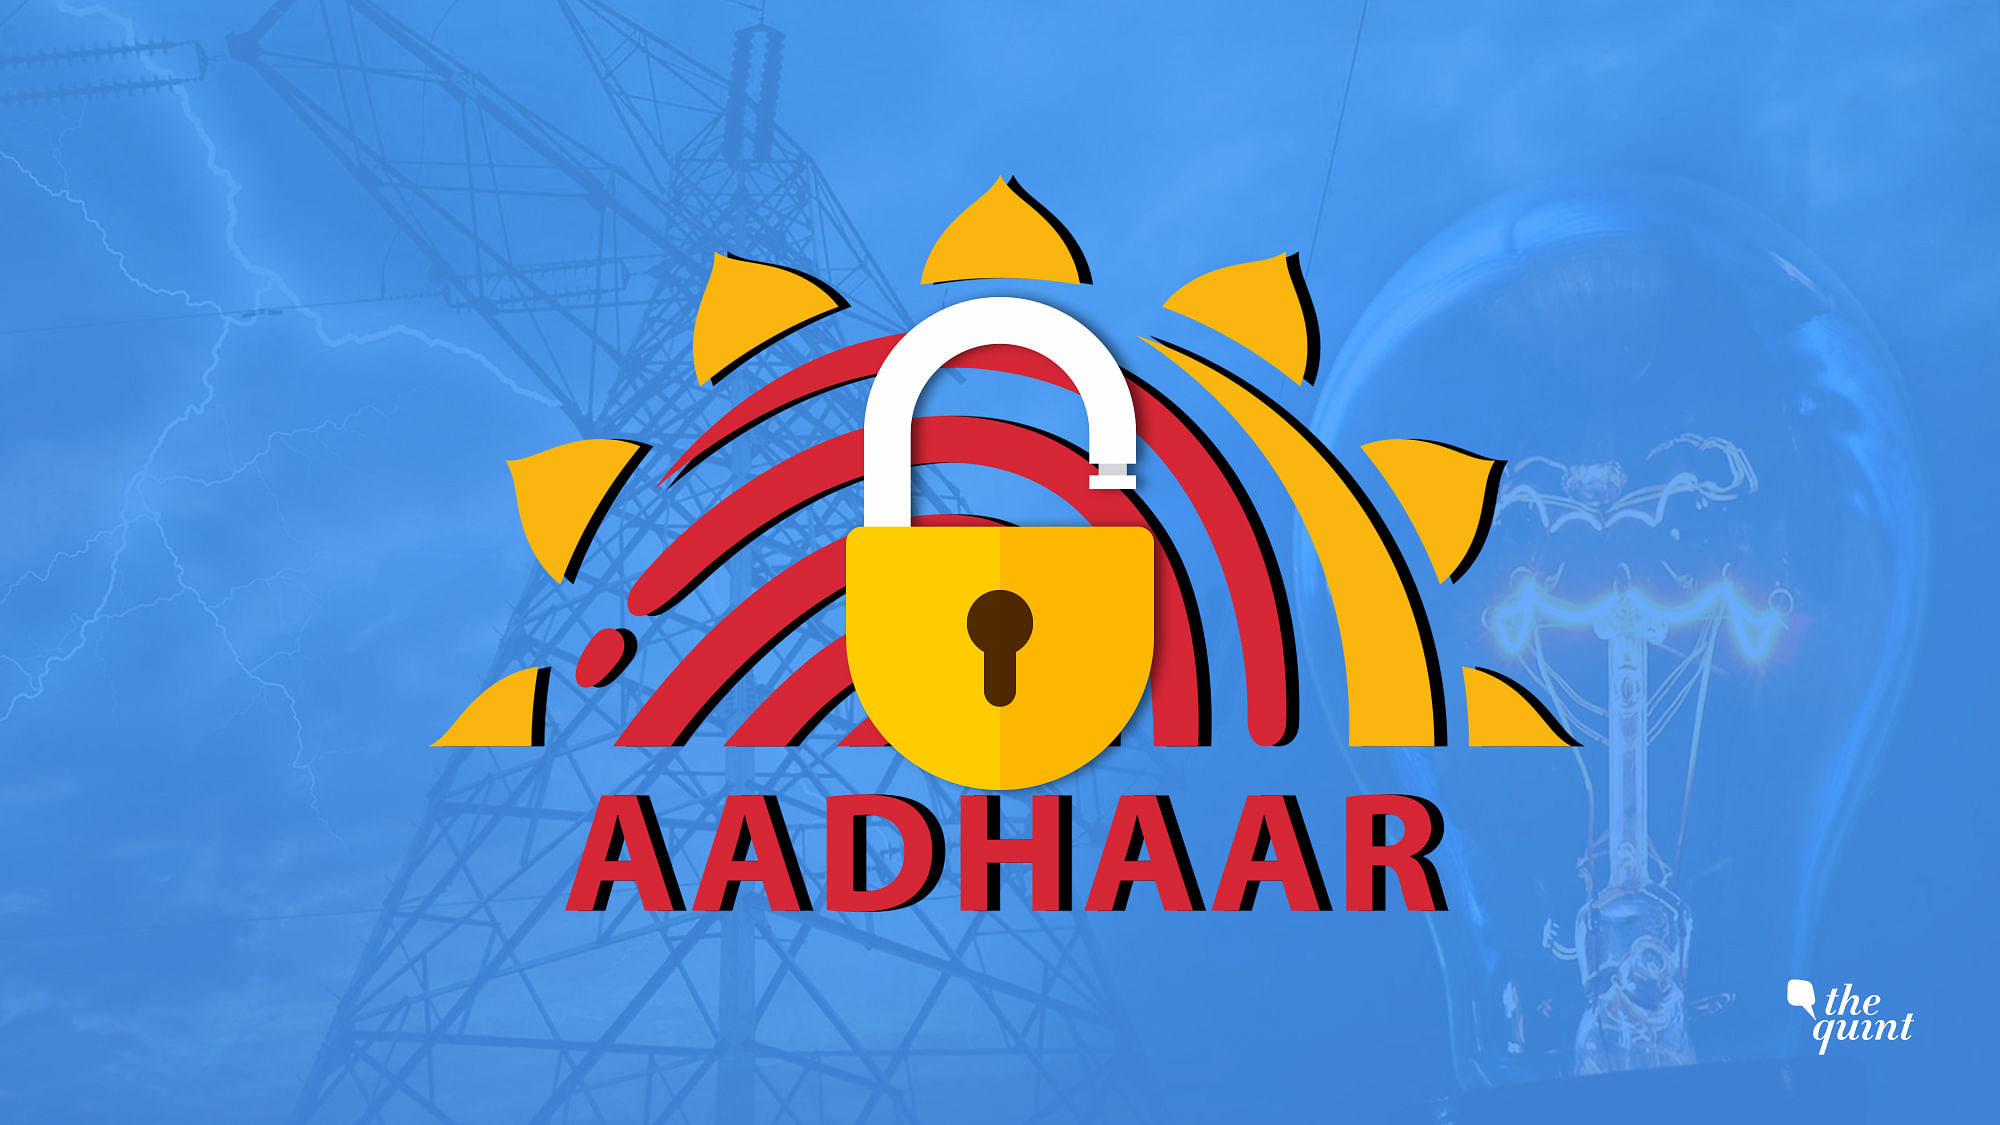 Media reports claimed that Google and smart card lobbies were charged of not wanting Aadhaar to succeed lest they go out of business.